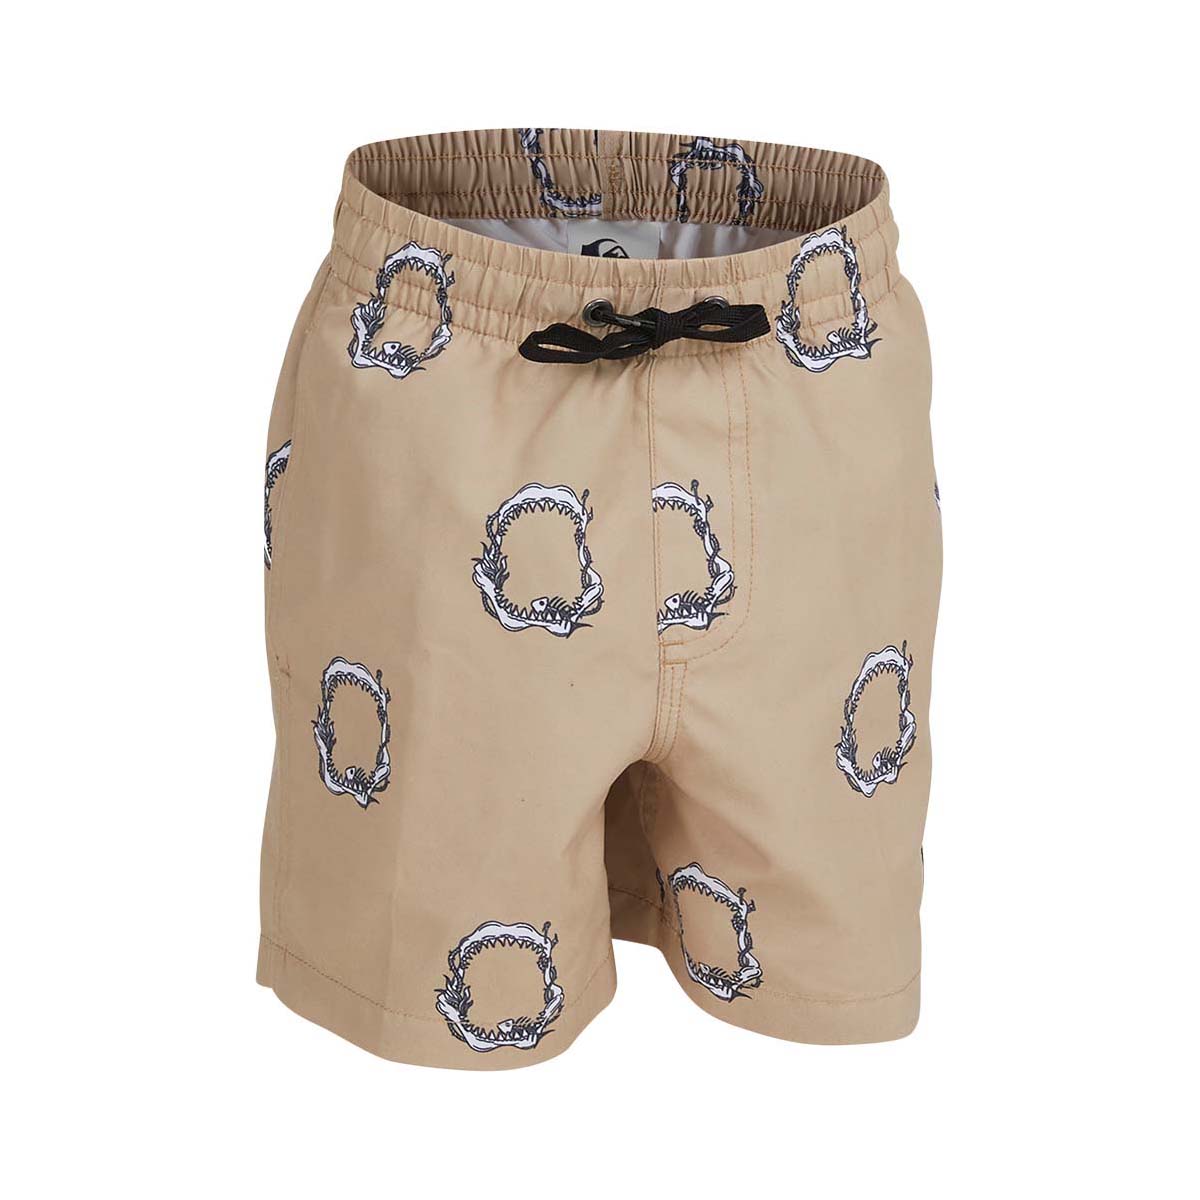 Quiksilver Kids' Tooth Pick Boardshorts Incense 4